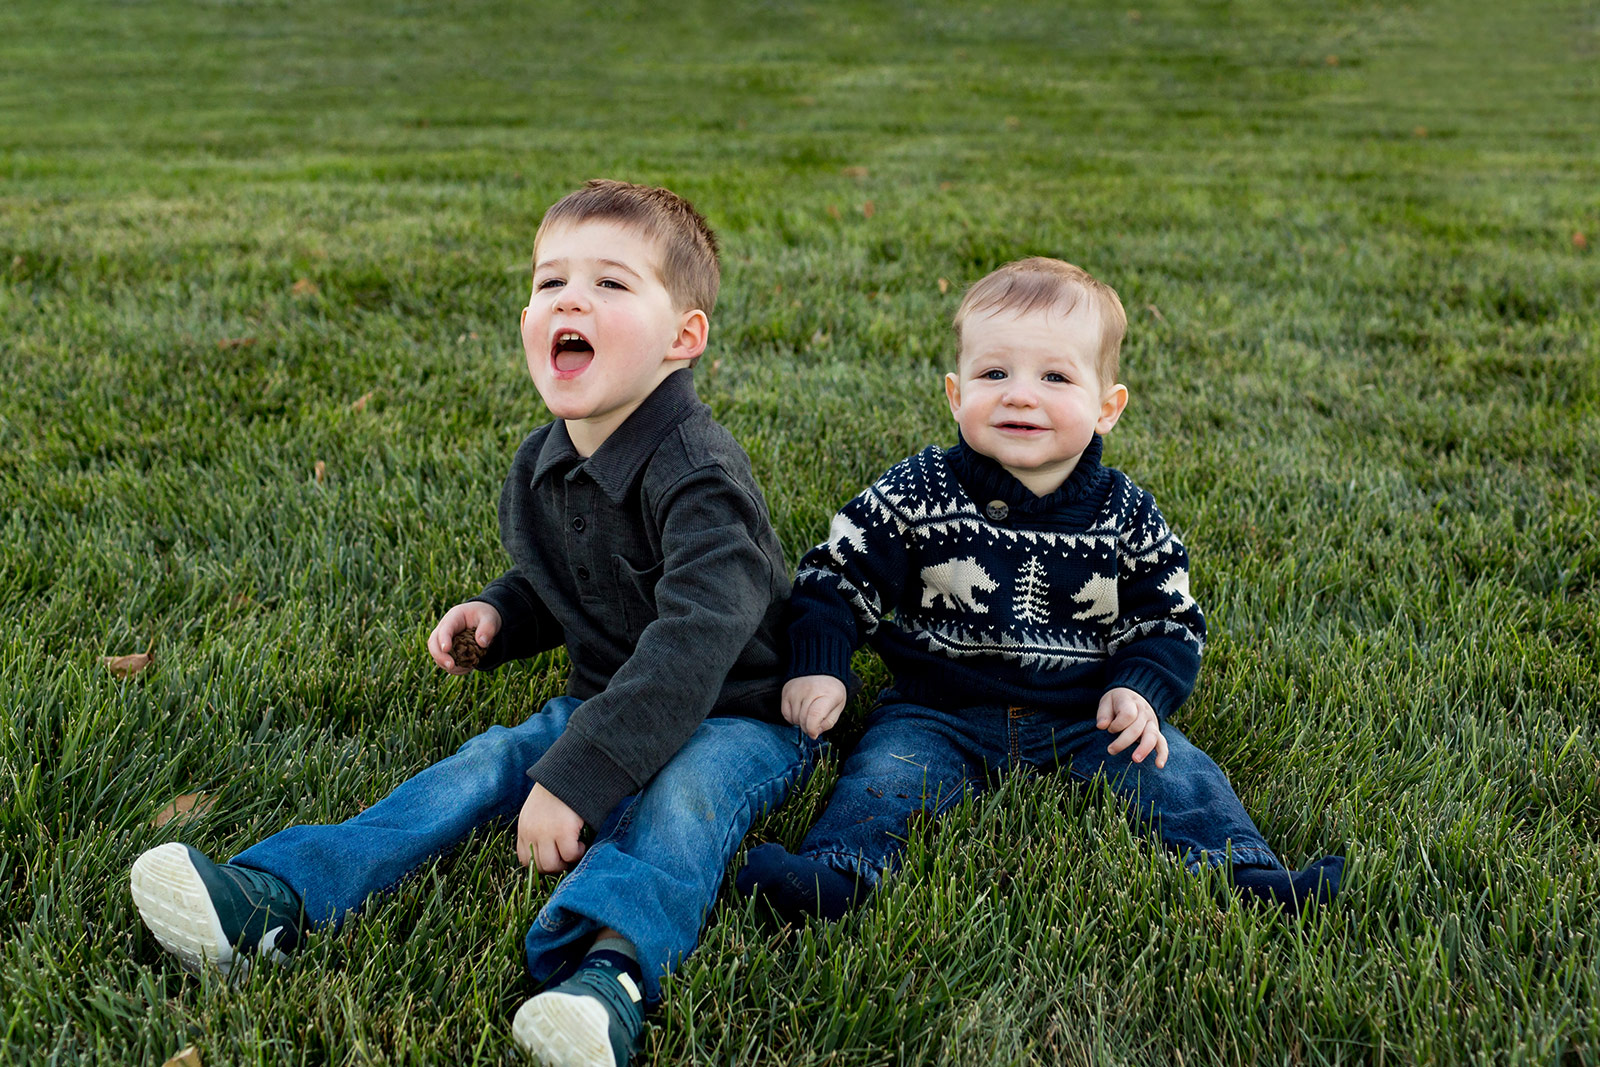 Jaxson and Beckham sit together in the grass.